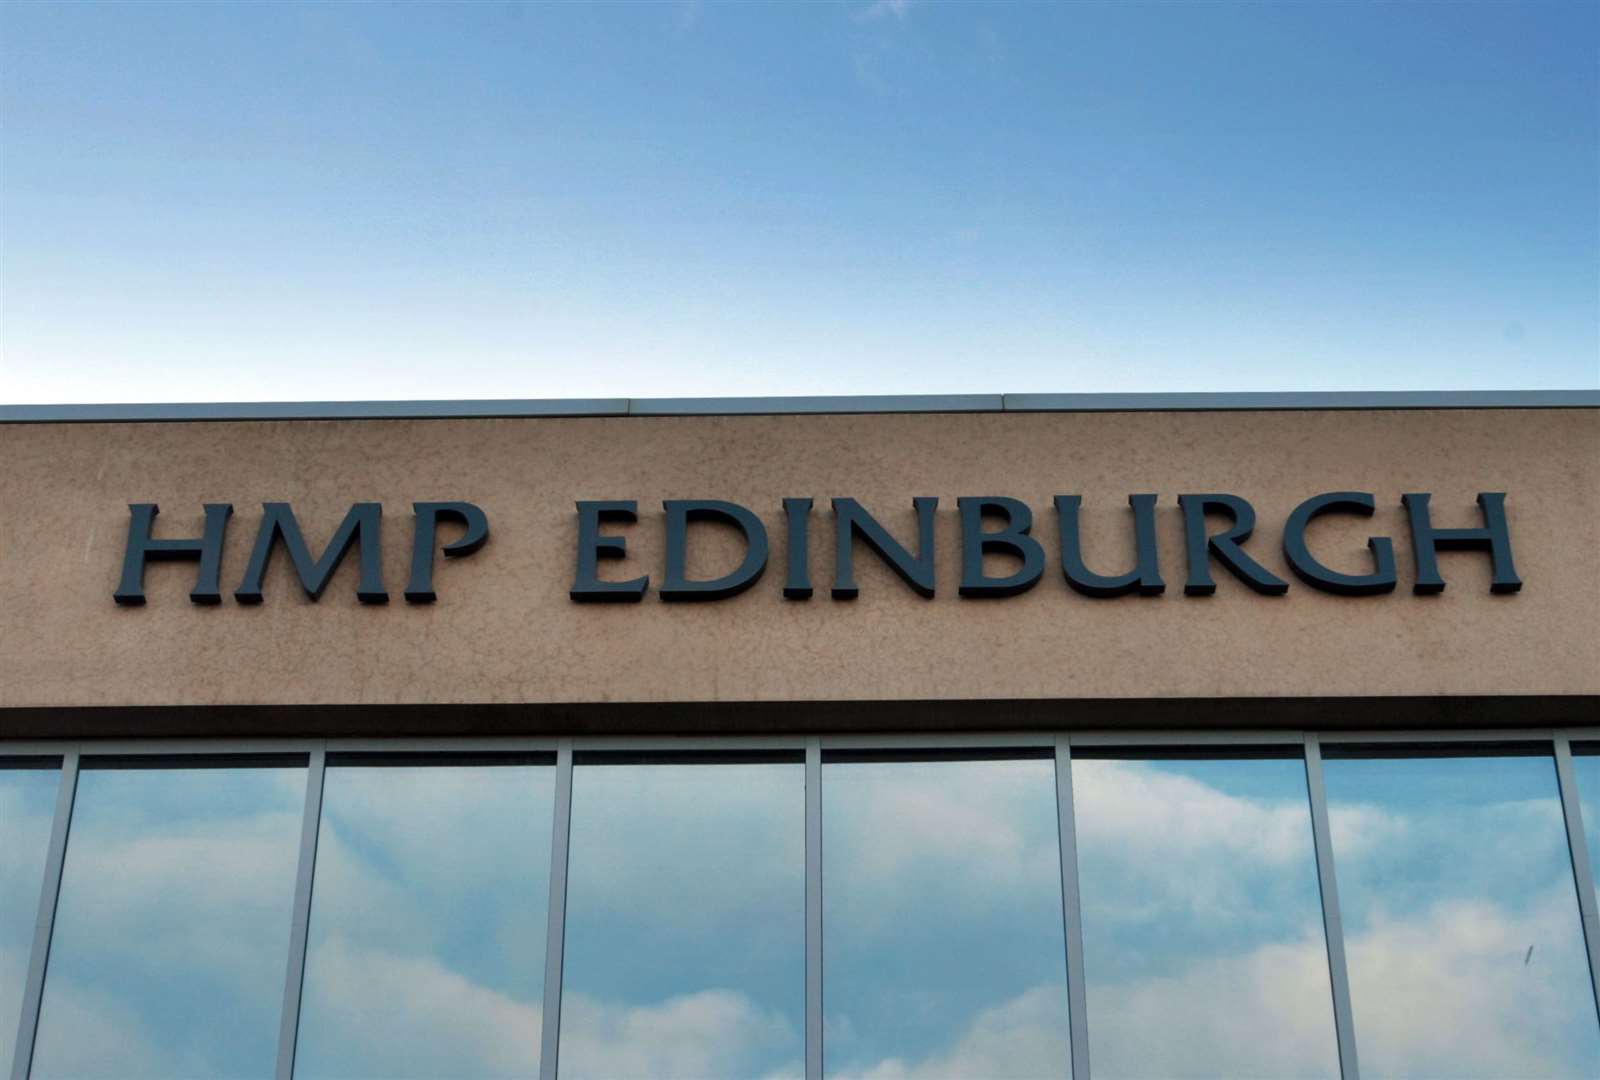 Police Scotland confirmed they received a report of a hate crime at HMP Edinburgh (David Cheskin/PA)